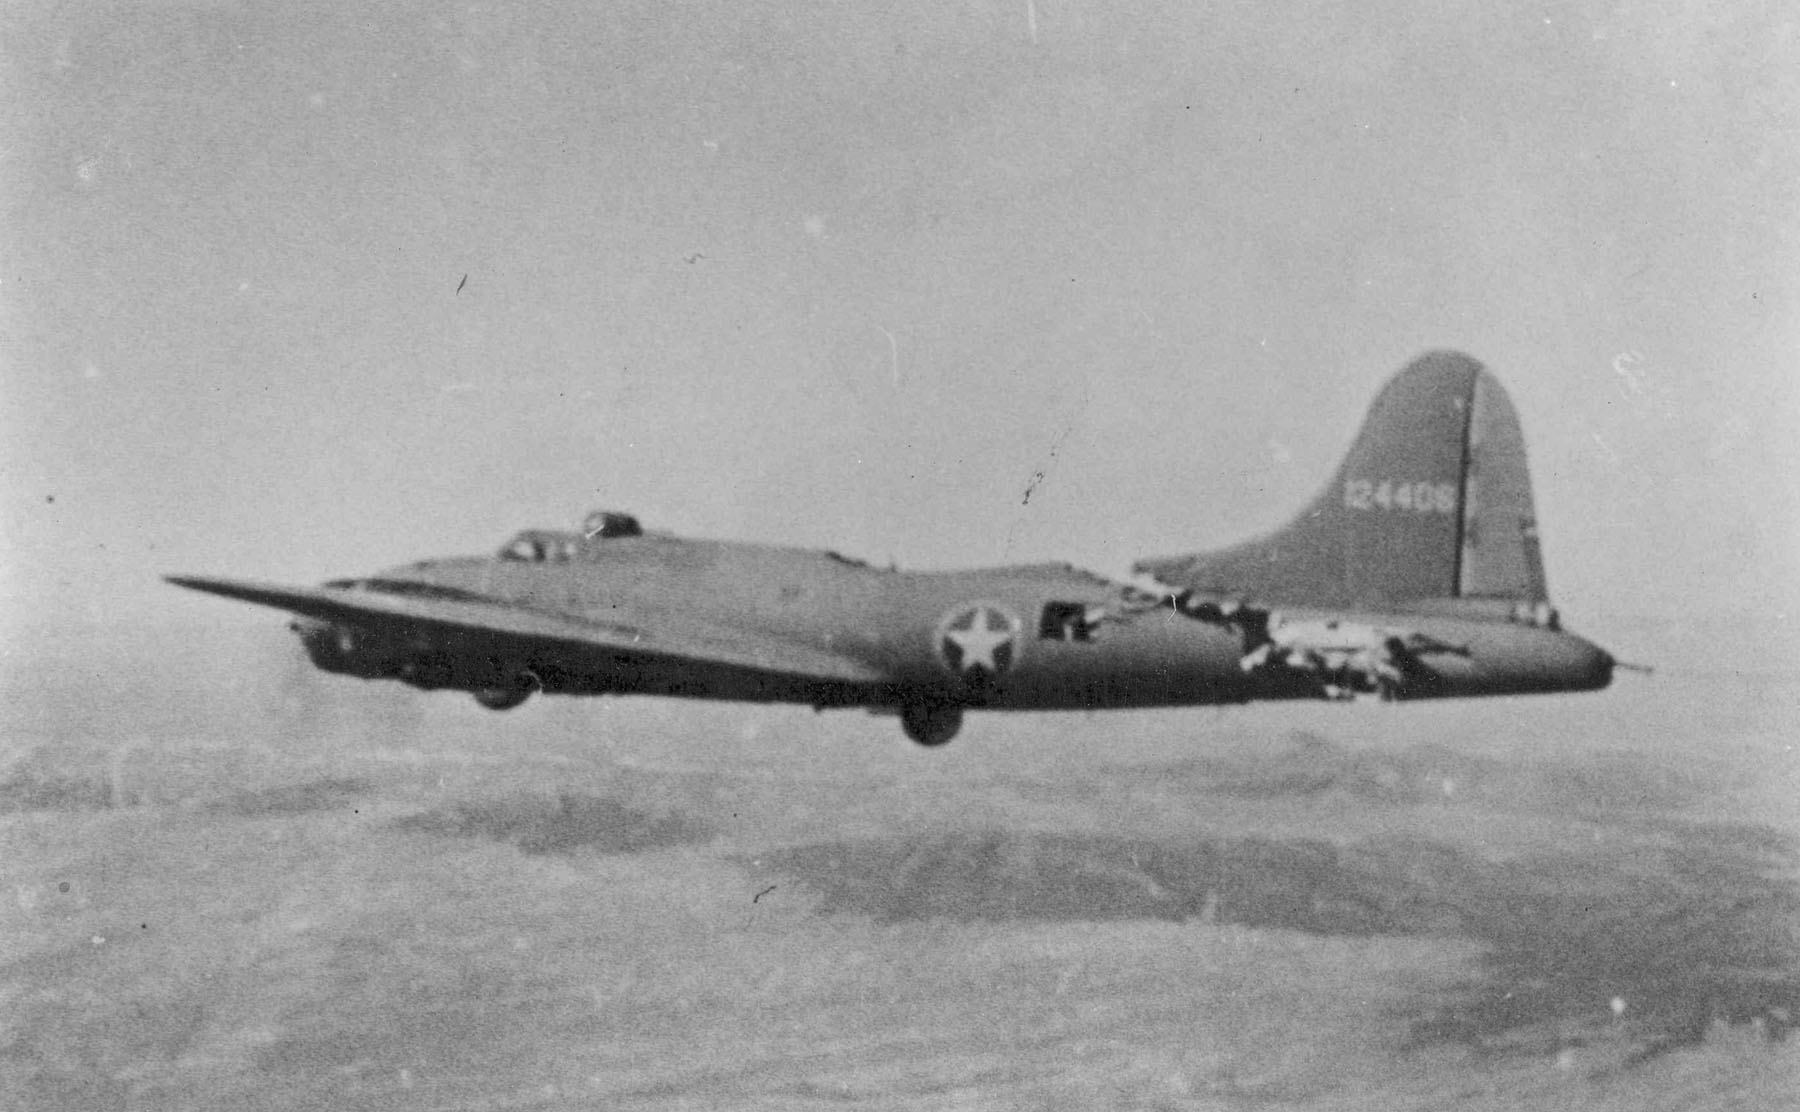 A badly damaged Boeing B-17F-5-BO Flying Fortress, 41-24406, All American III, after collision with an Me 109 over Tunis, 1 February 1943. (U.S. Air Force)